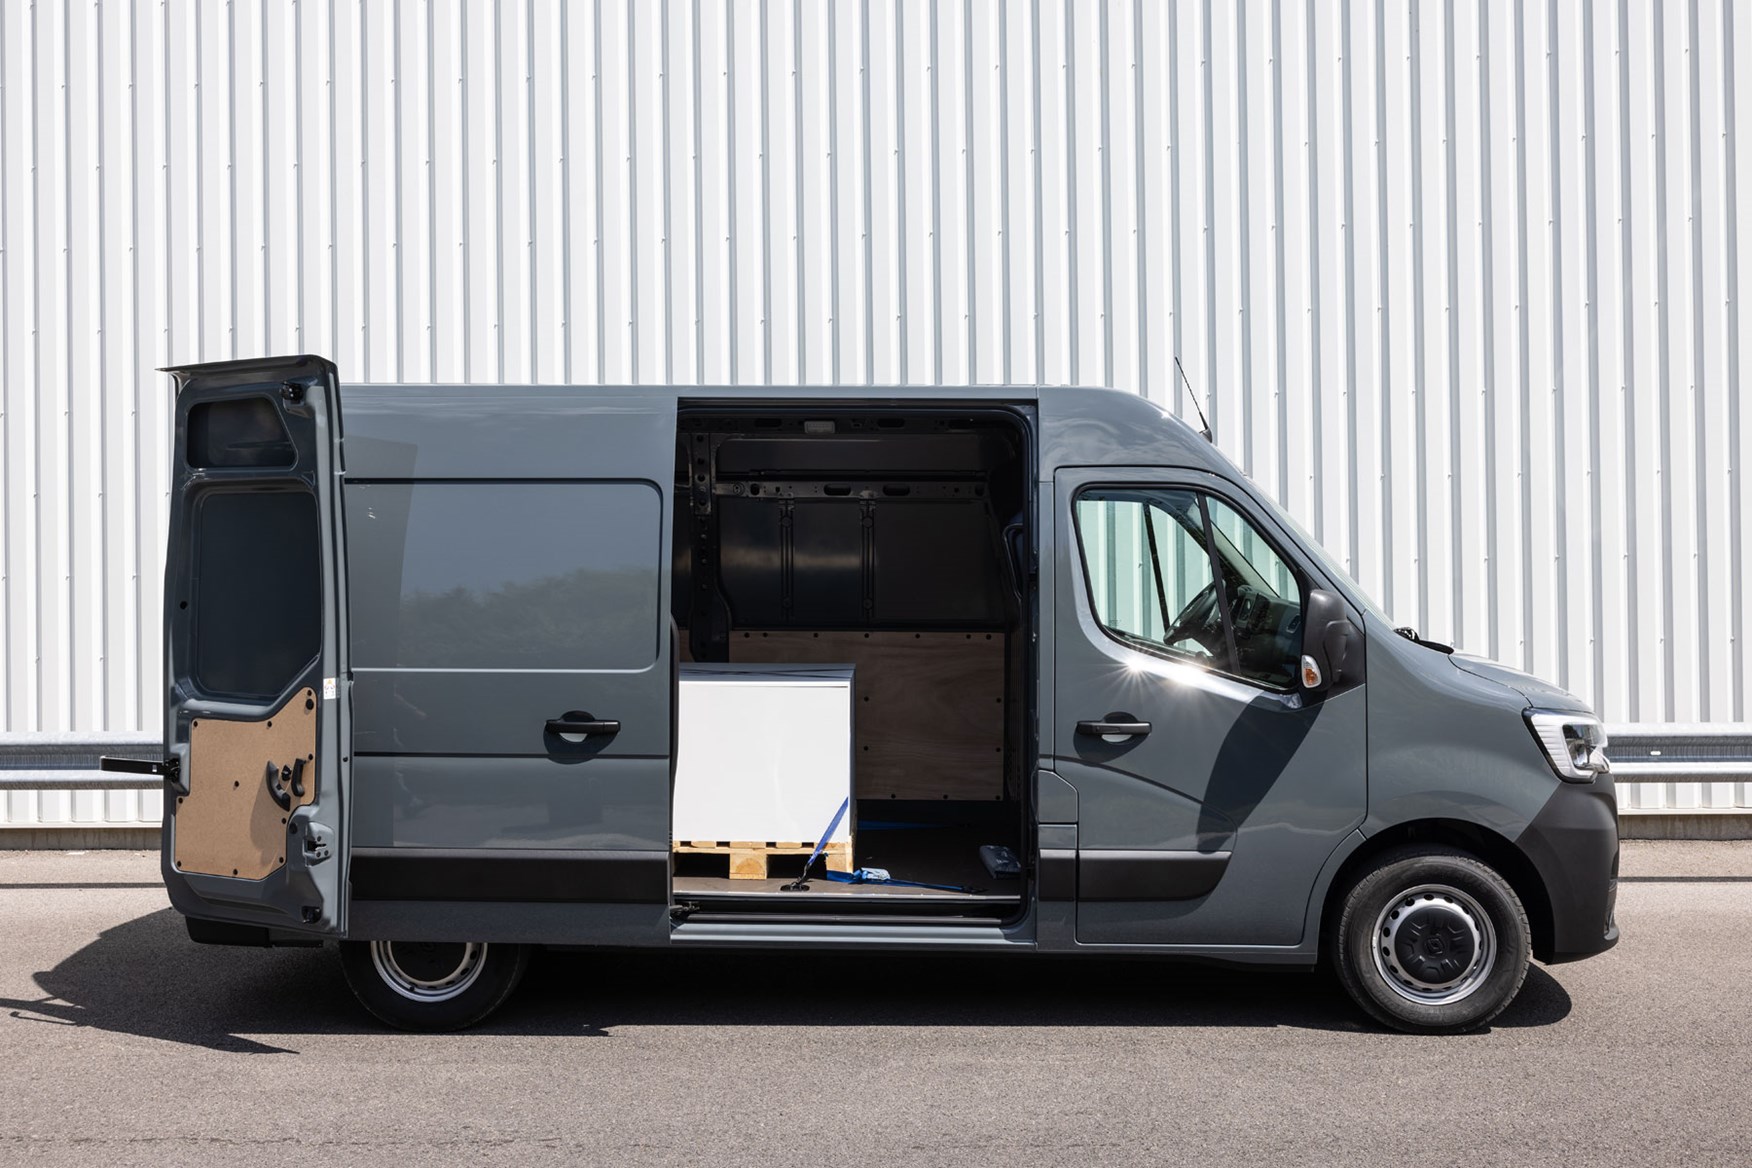 Renault Master E-Tech electric van dimensions (2021-on), capacity, payload,  volume, towing